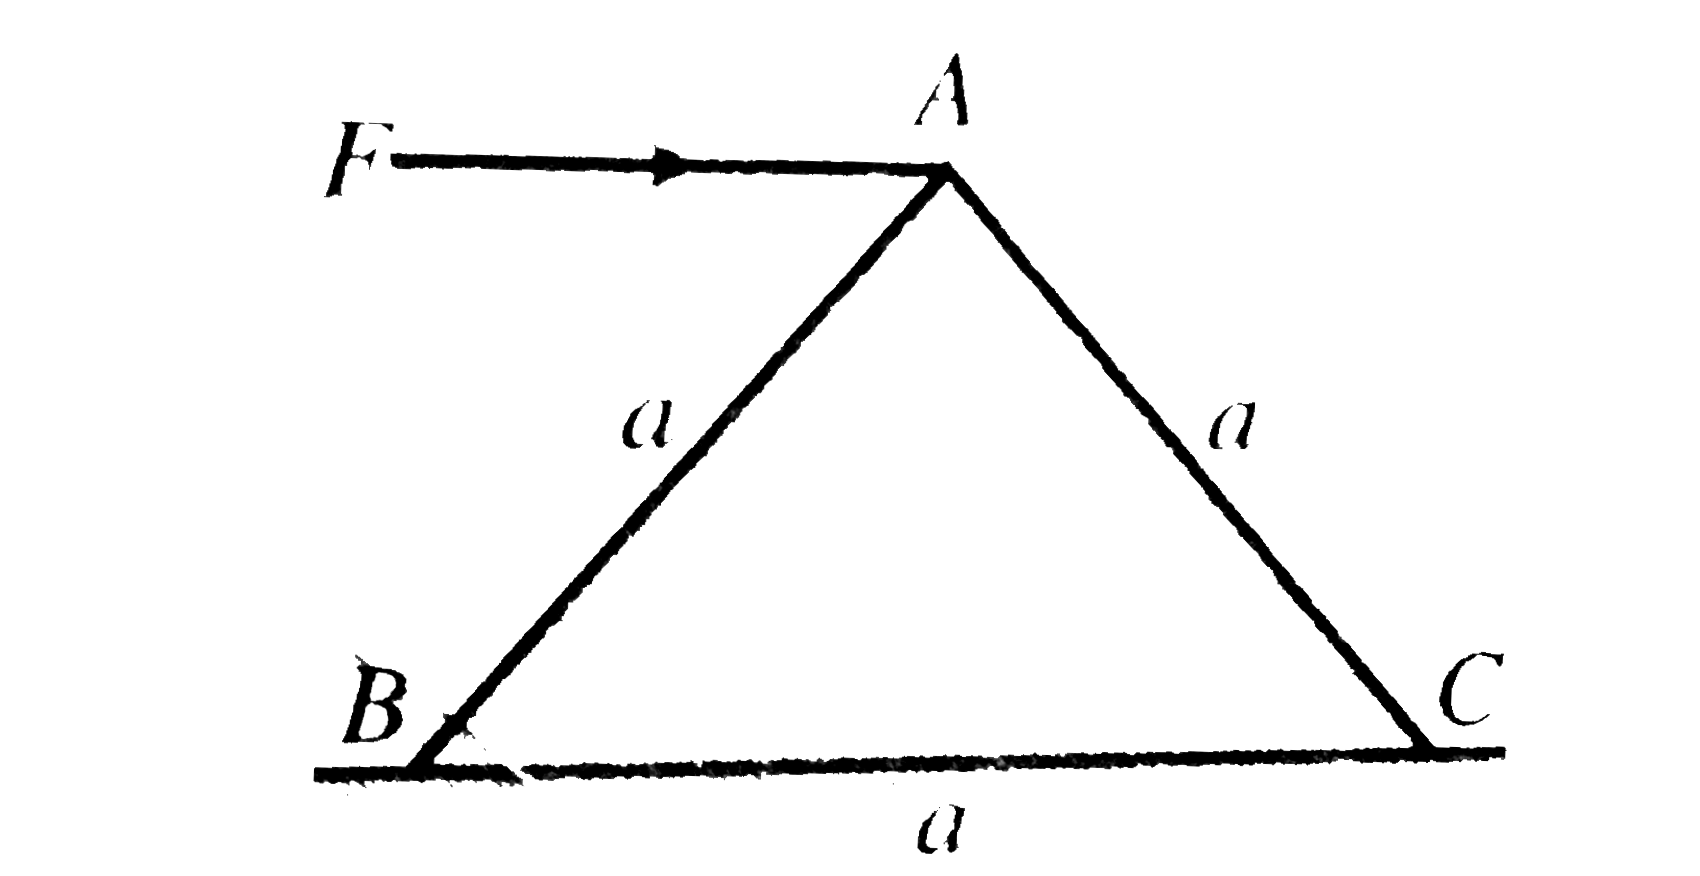 A horizontal force F is applied at the top of an equilateral triangular block having mass m. The minimum coefficient of friction required to topple the block before translation will be